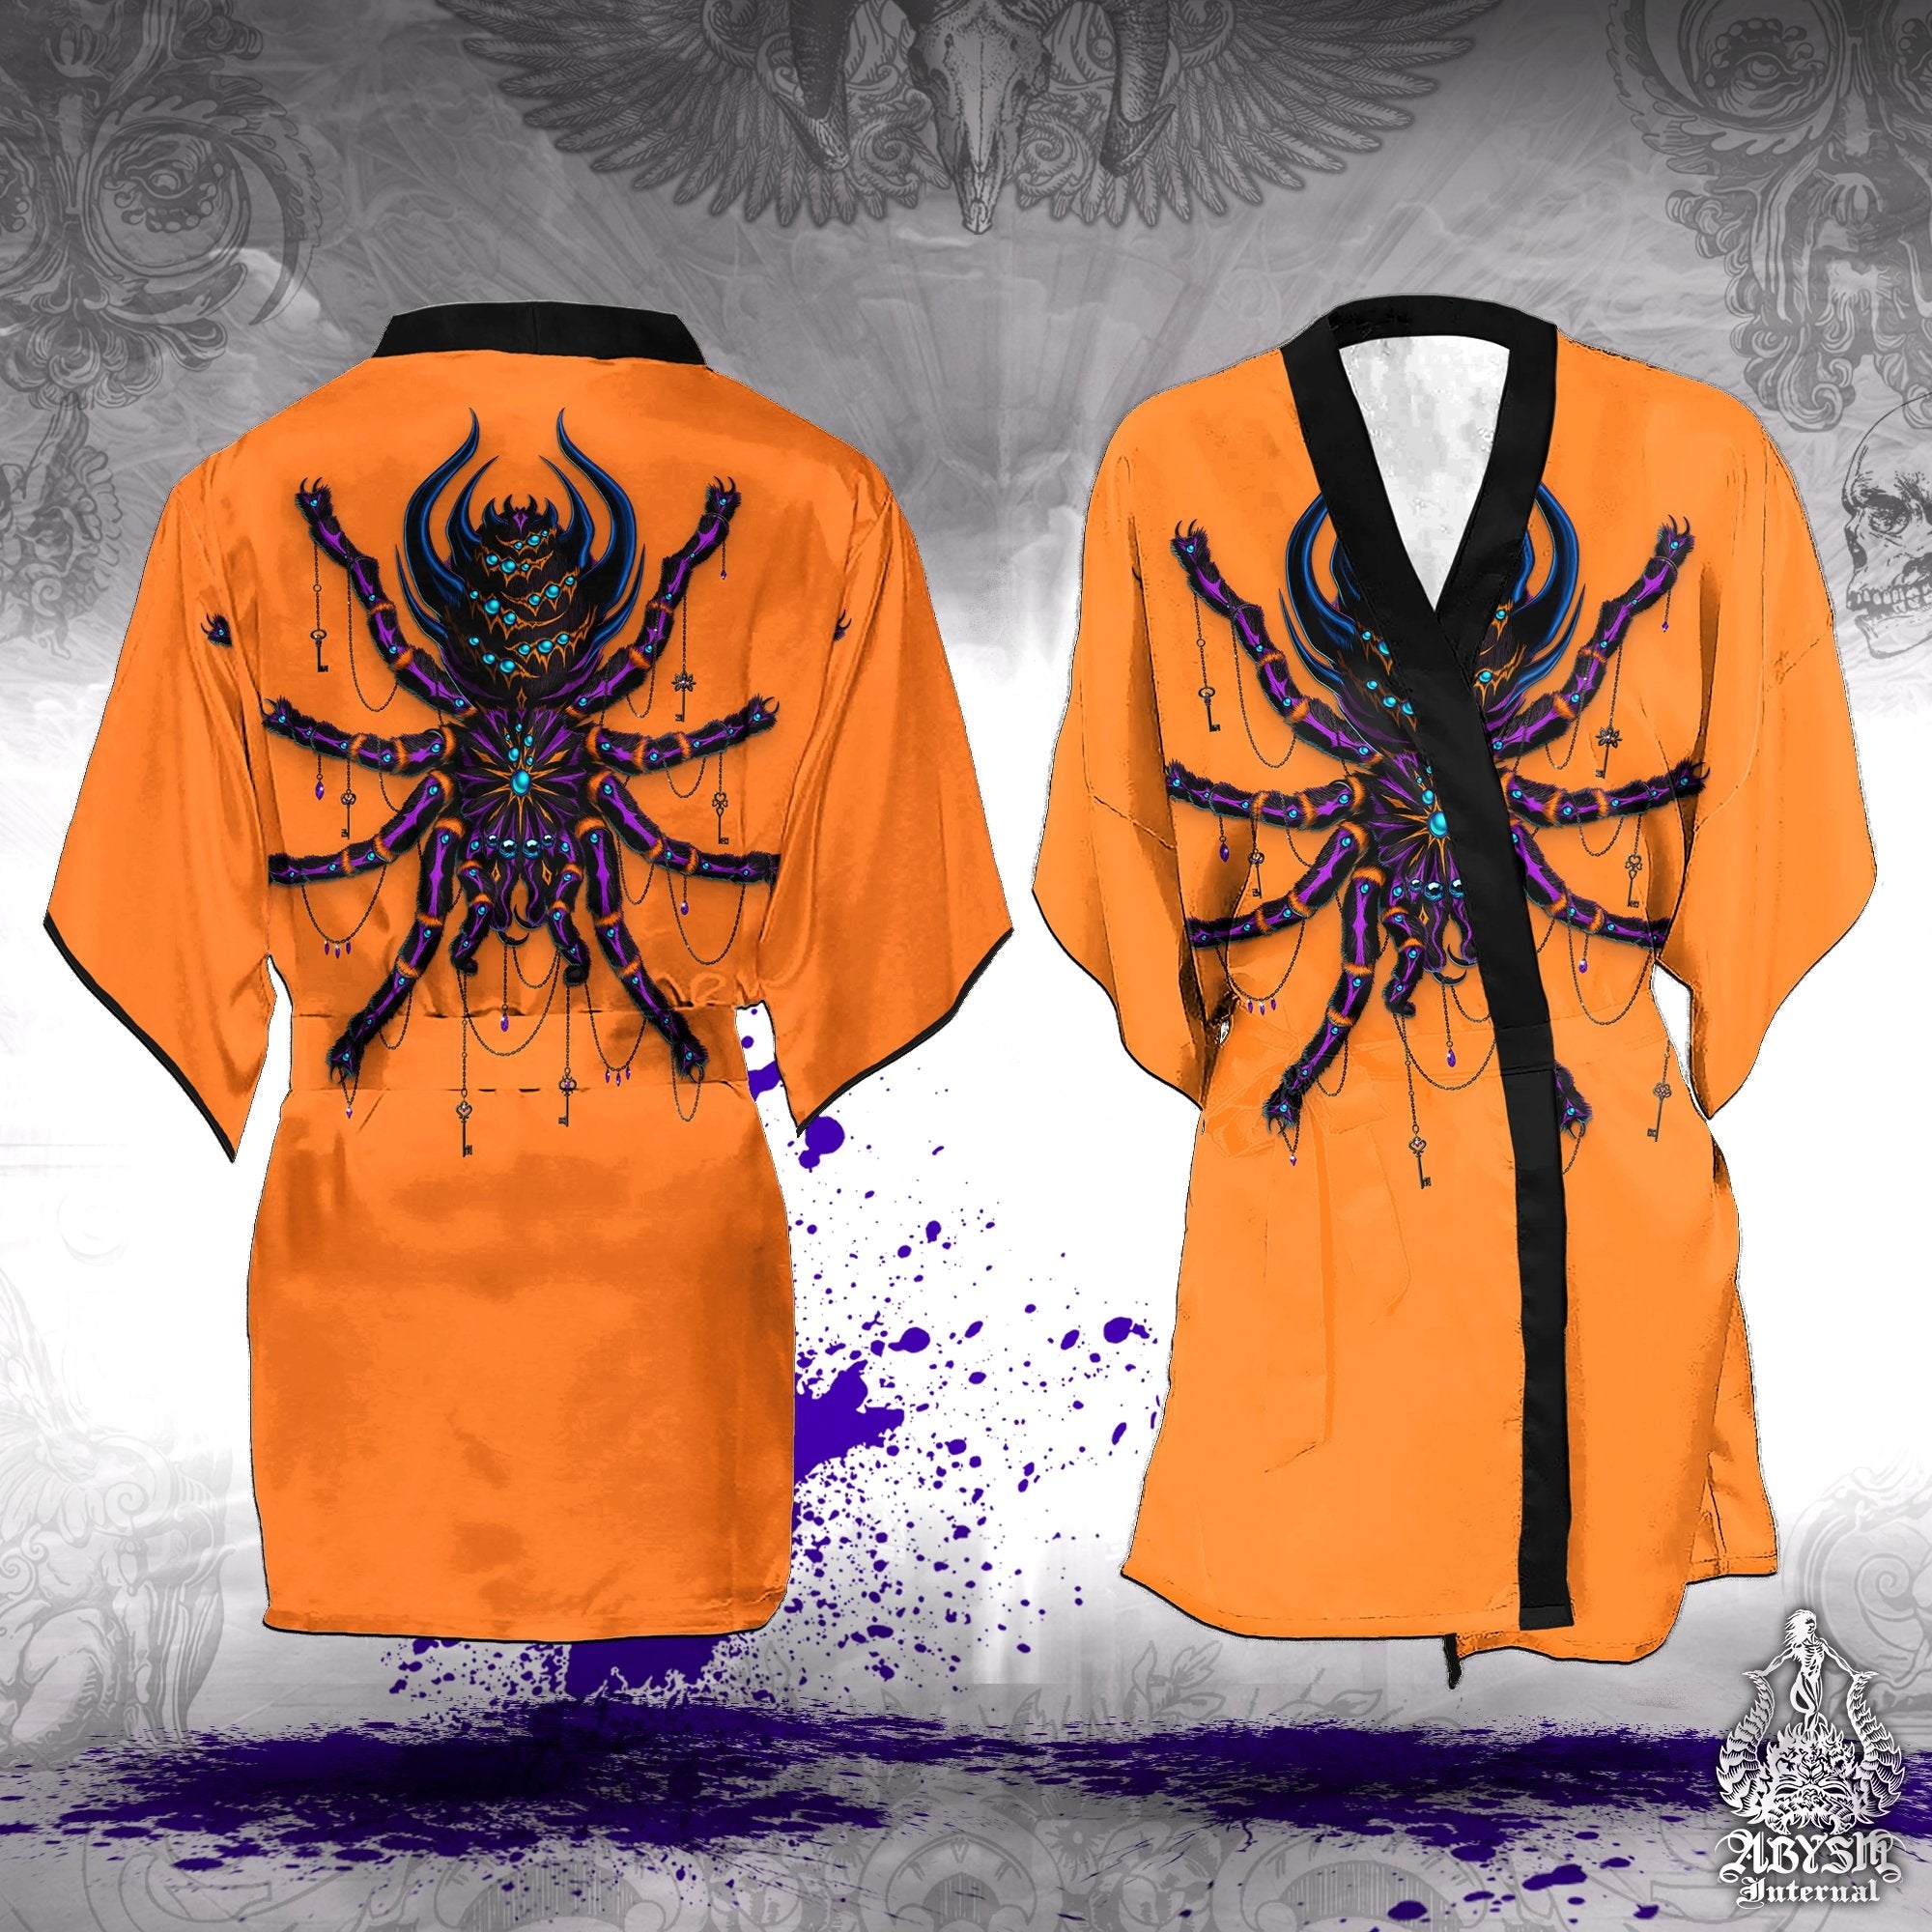 Spider Cover Up, Halloween Outfit, Goth Party Kimono, Summer Festival Robe, Alternative Clothing, Unisex - Tarantula, Neon - Abysm Internal